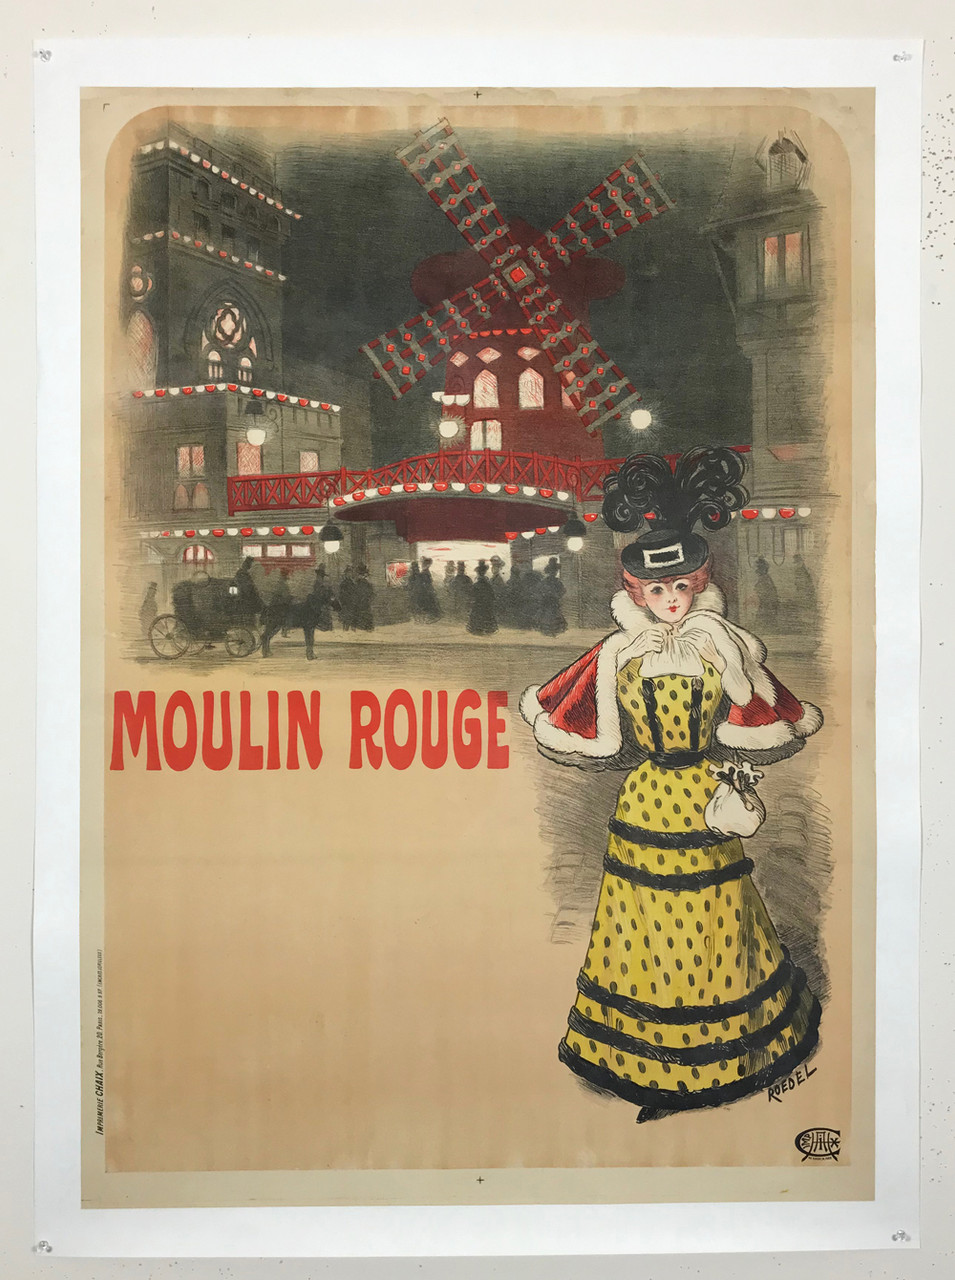 Moulin Rouge by Roedel Original 1897 Antique French Theater Cabaret Advertisement Stone Lithograph Vintage Poster Linen Backed. Artists Proof before letters.